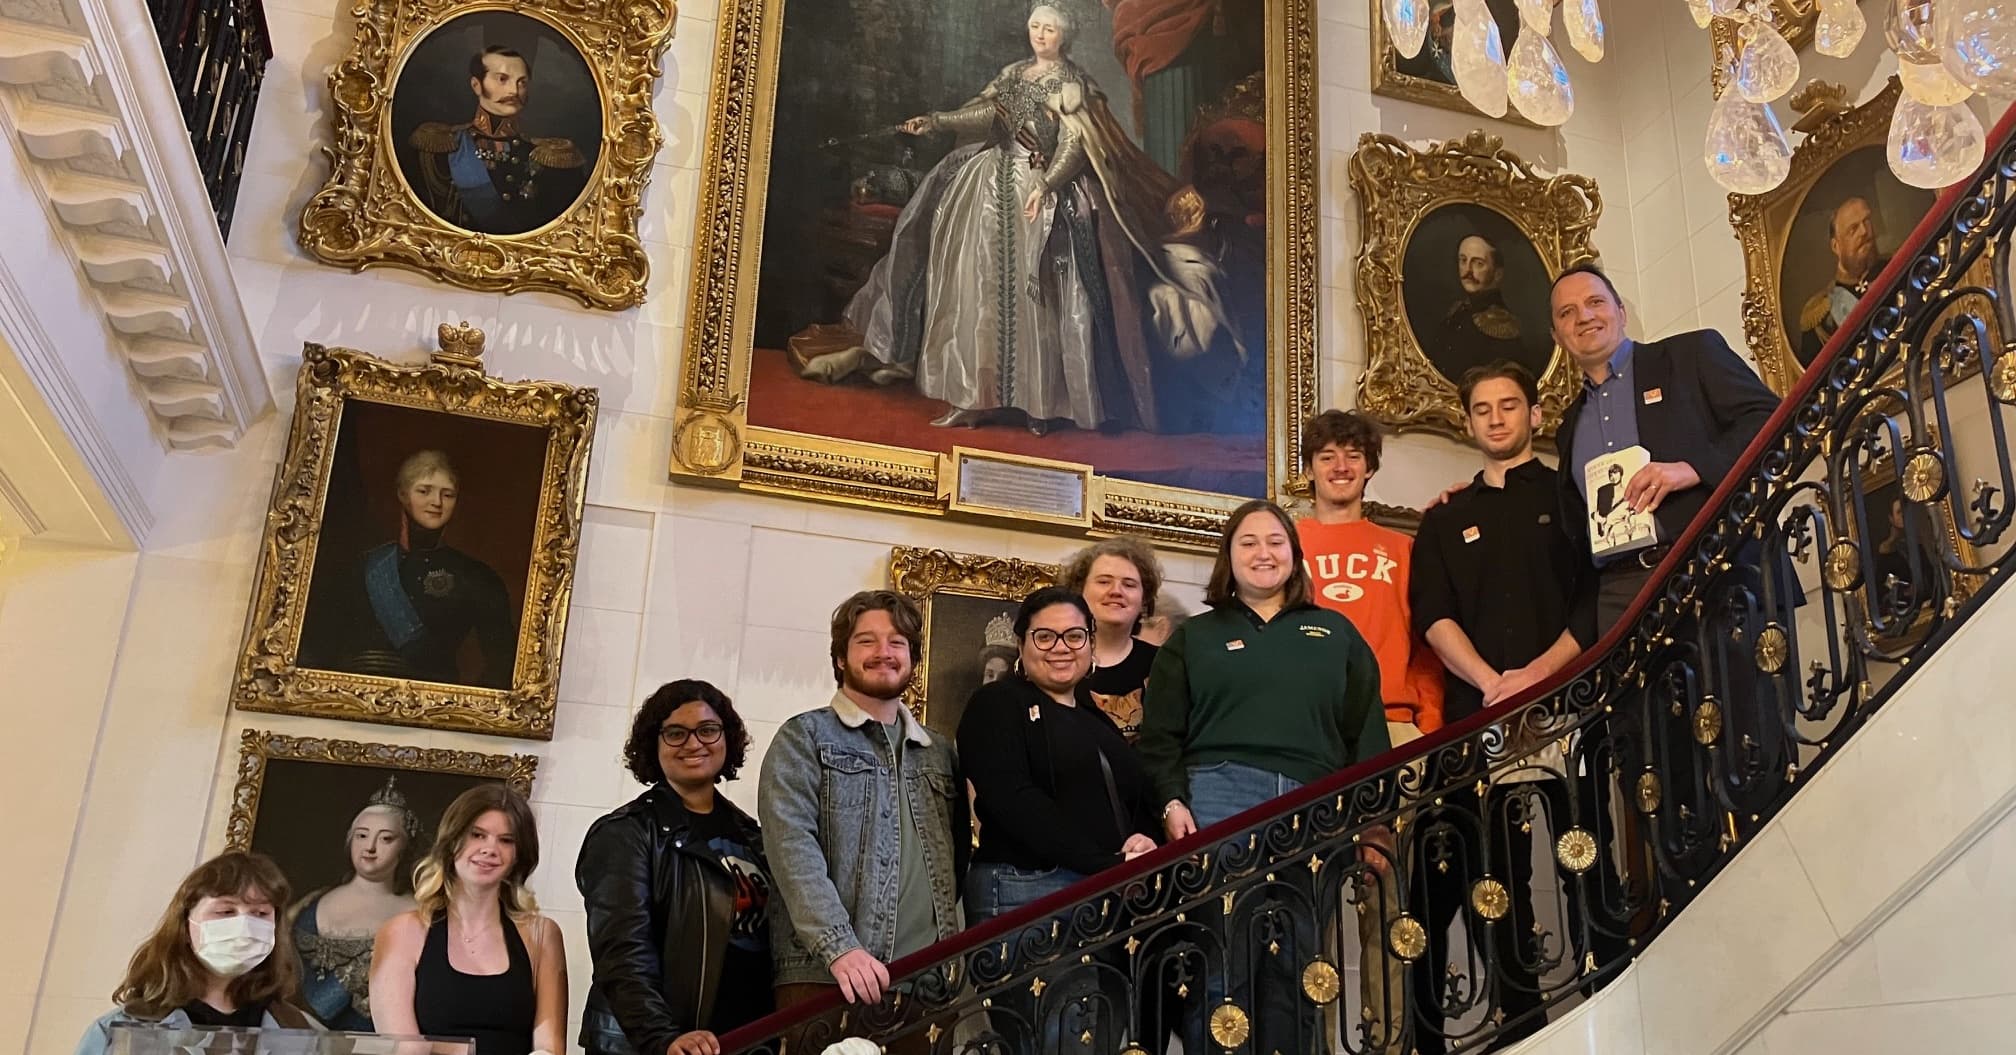 Students on the Hillwood House Grand Staircase with paintings of Russian Tsars and nobility on the walls.